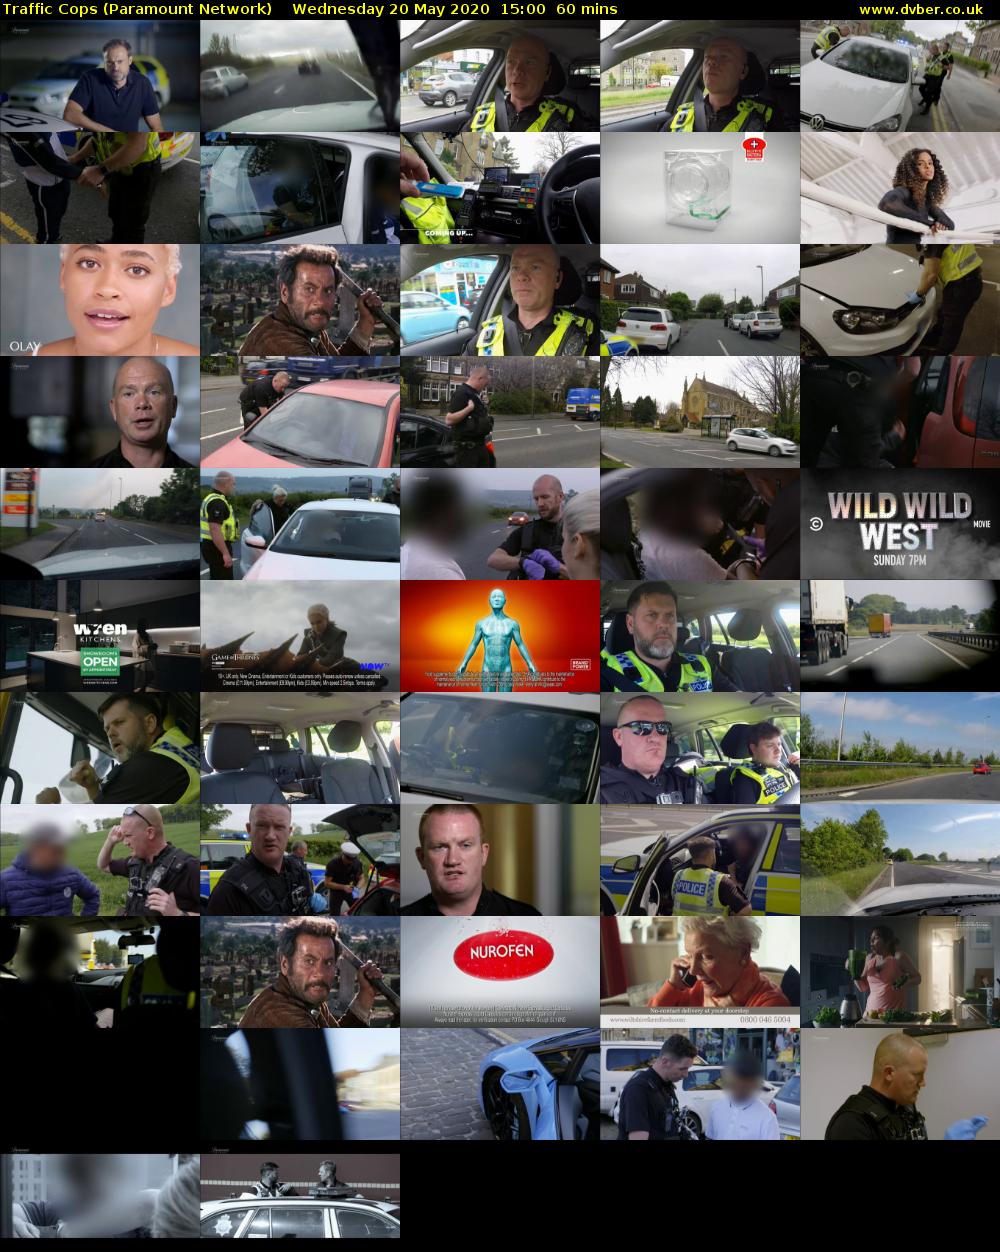 Traffic Cops (Paramount Network) Wednesday 20 May 2020 15:00 - 16:00